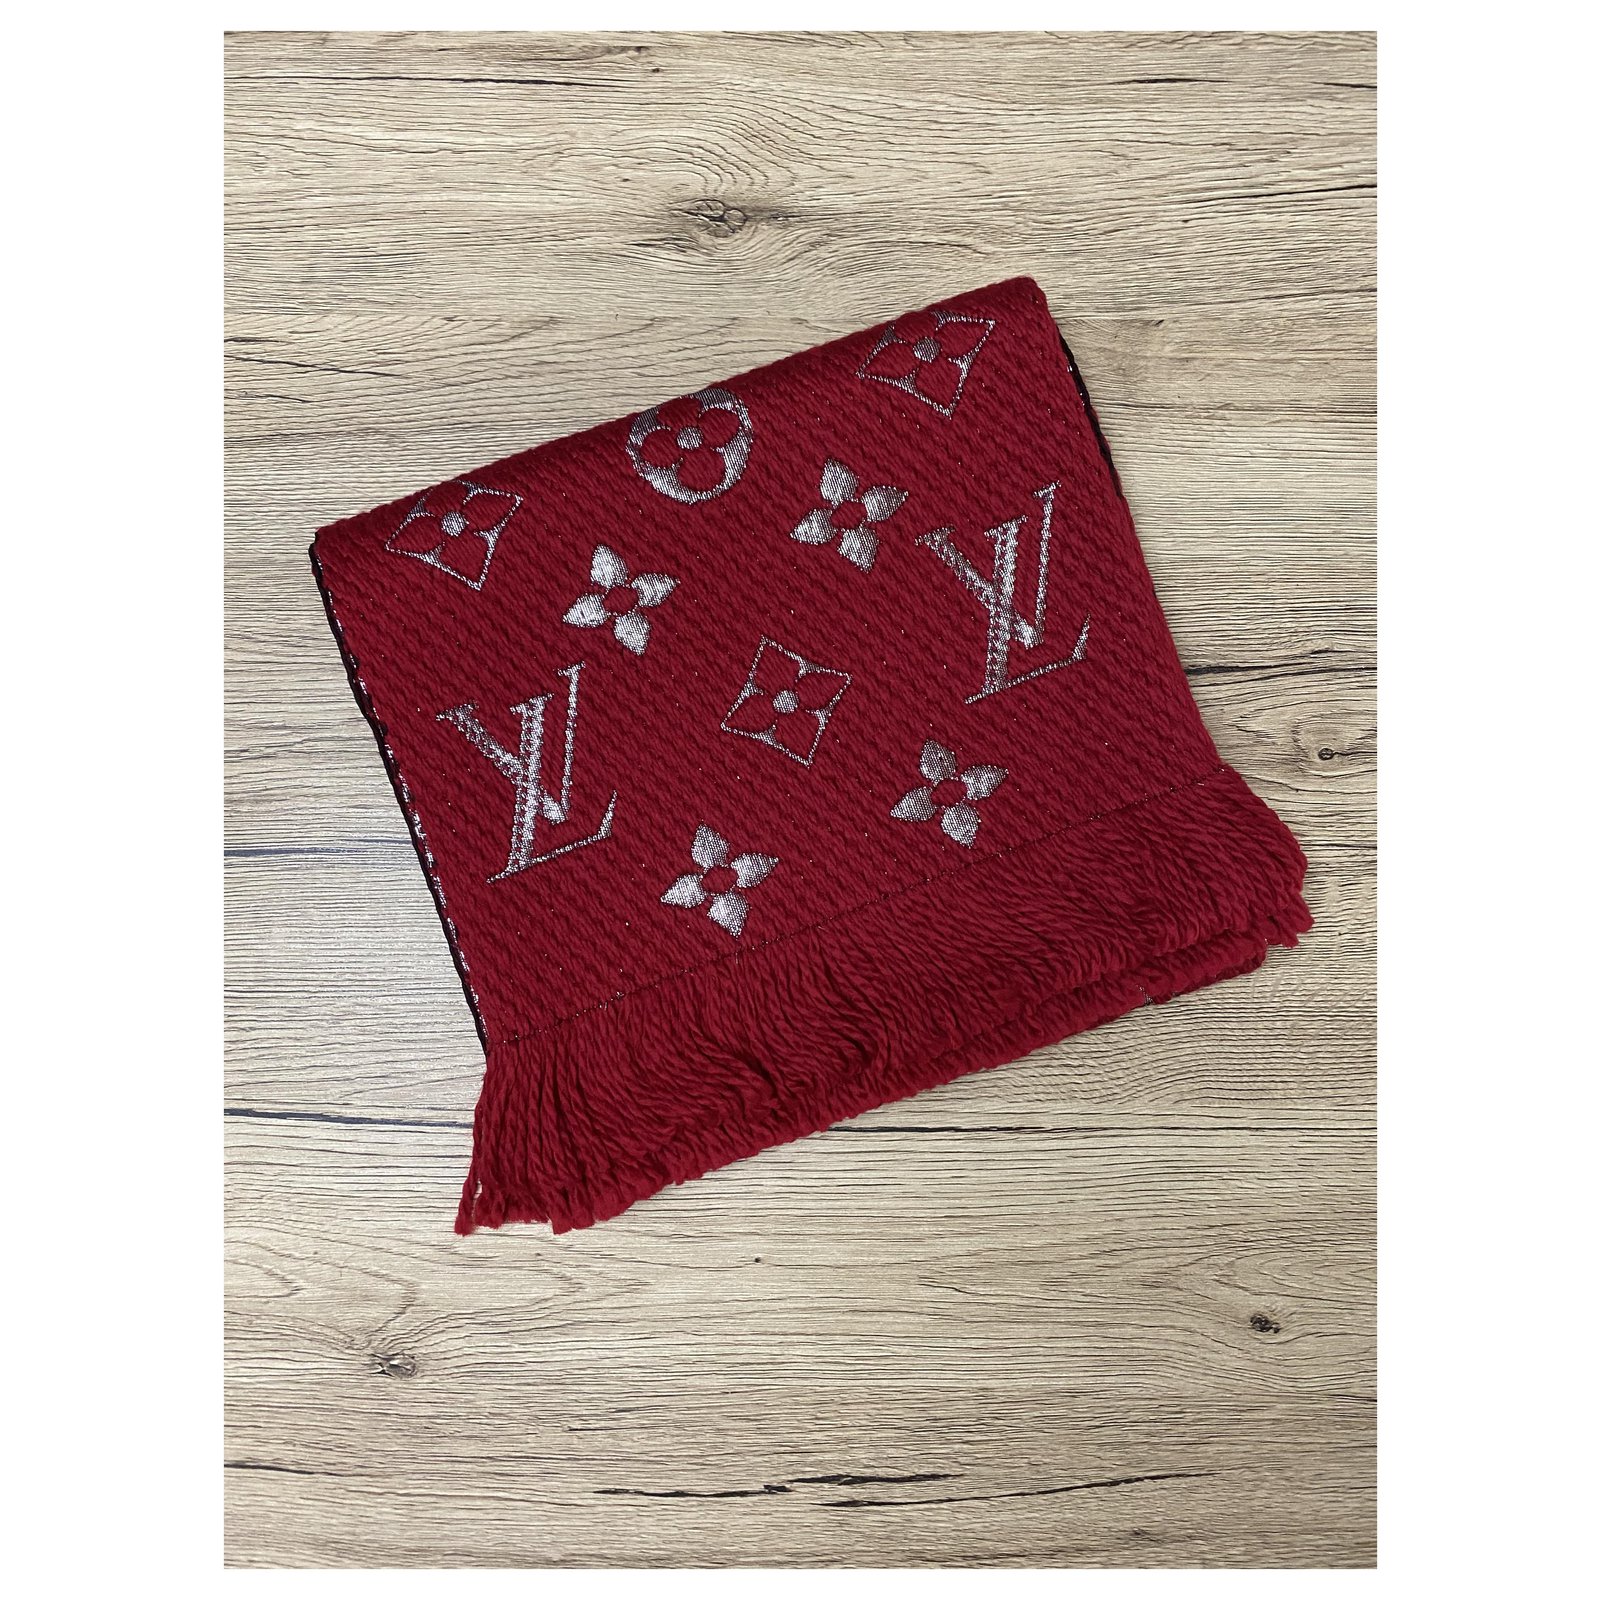 Louis Vuitton - Authenticated Logomania Scarf - Wool Red Abstract for Women, Never Worn